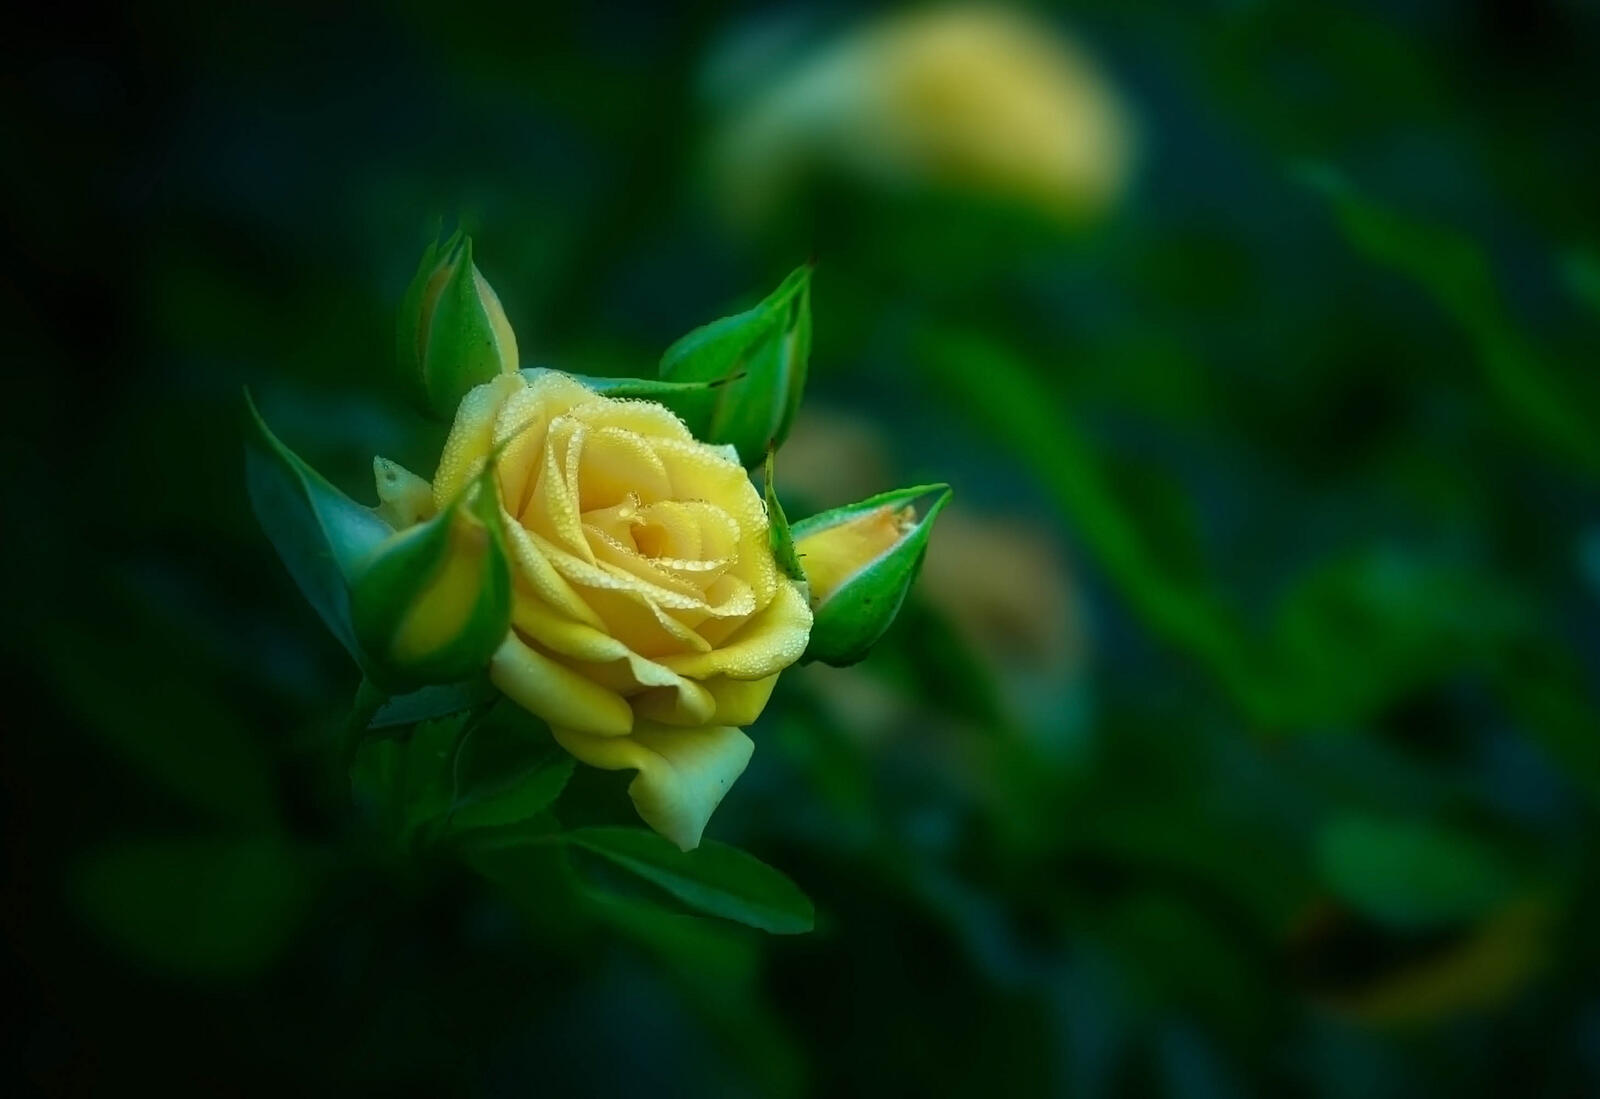 Wallpapers Yellow roses green background flower on the desktop